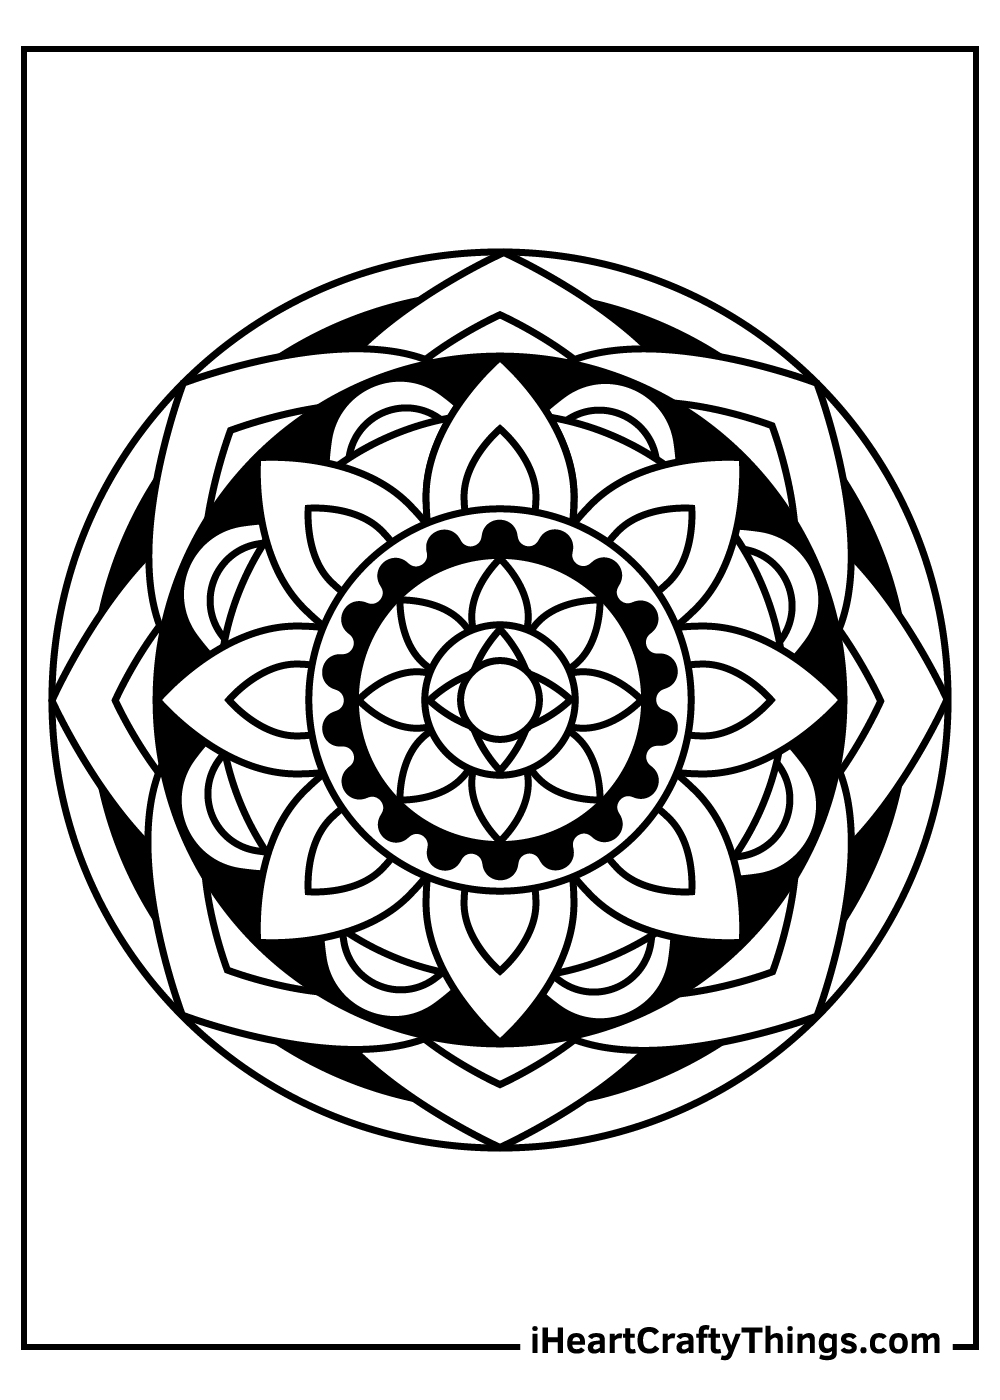 Printable Mandala Coloring Pages Updated 20